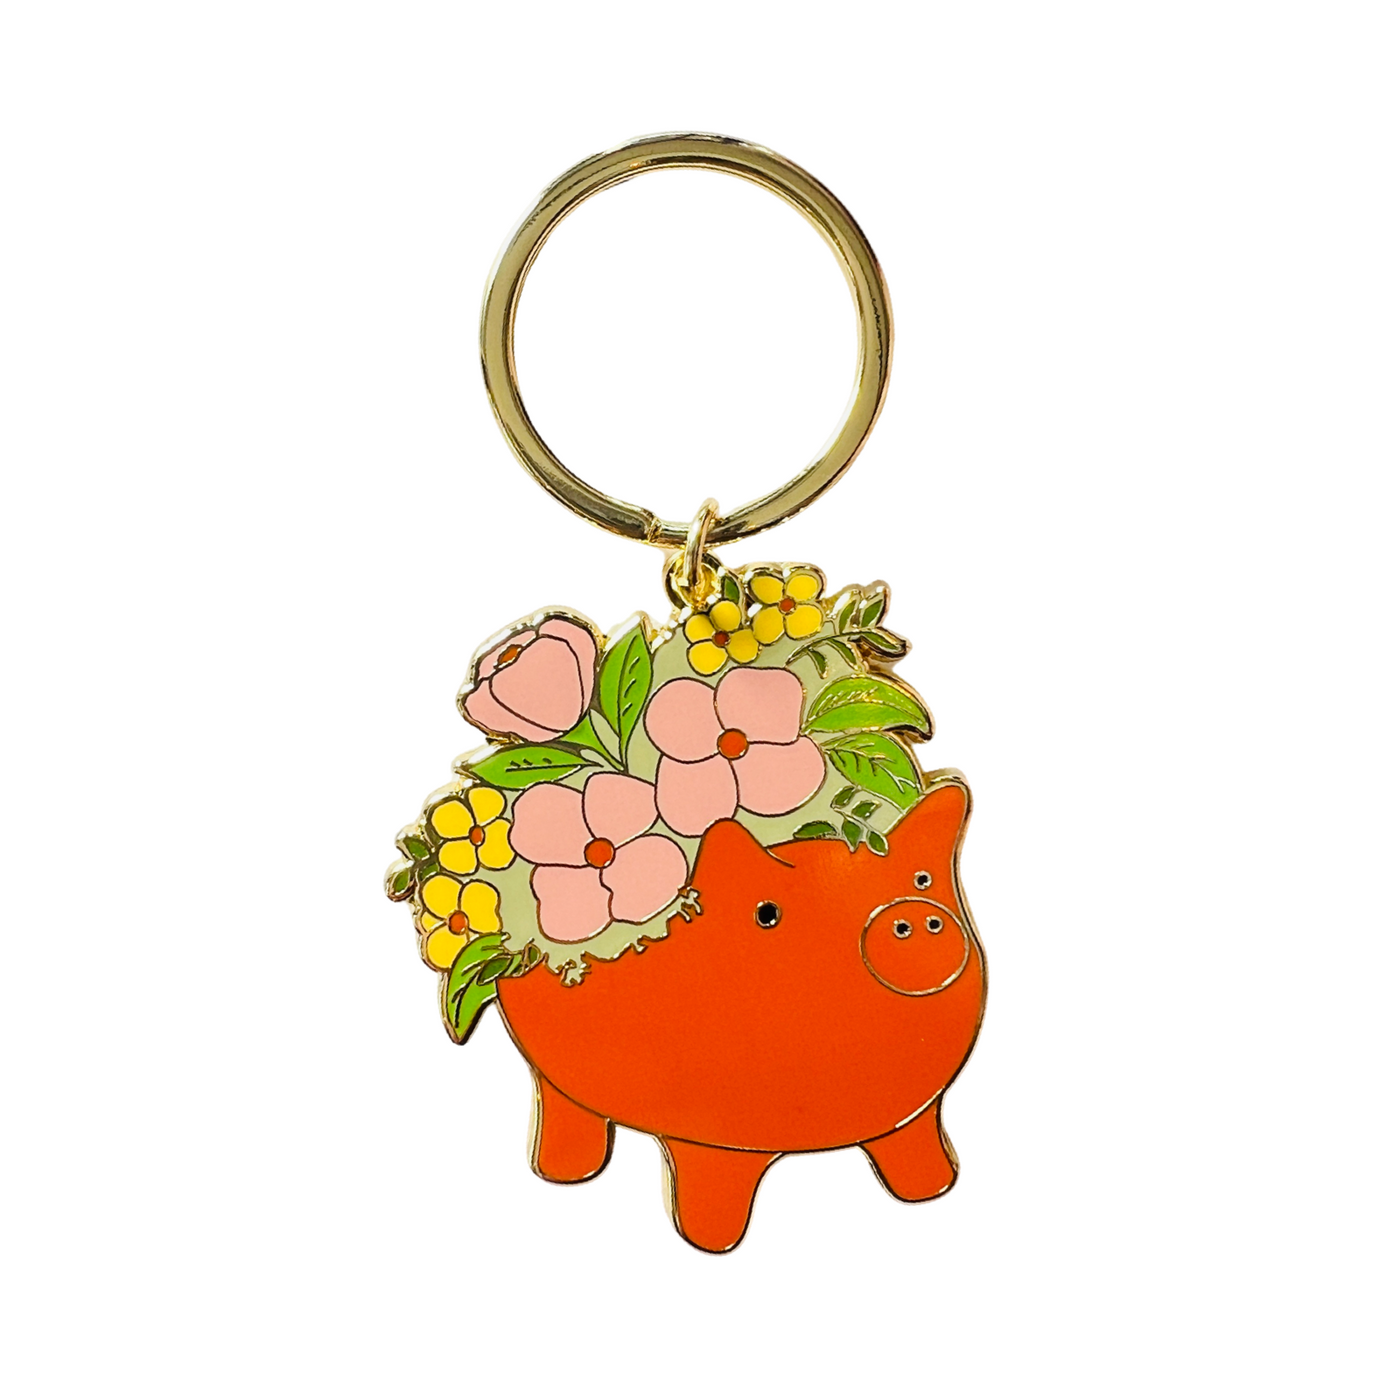 enamel keychain featuring a pig planter with flowers